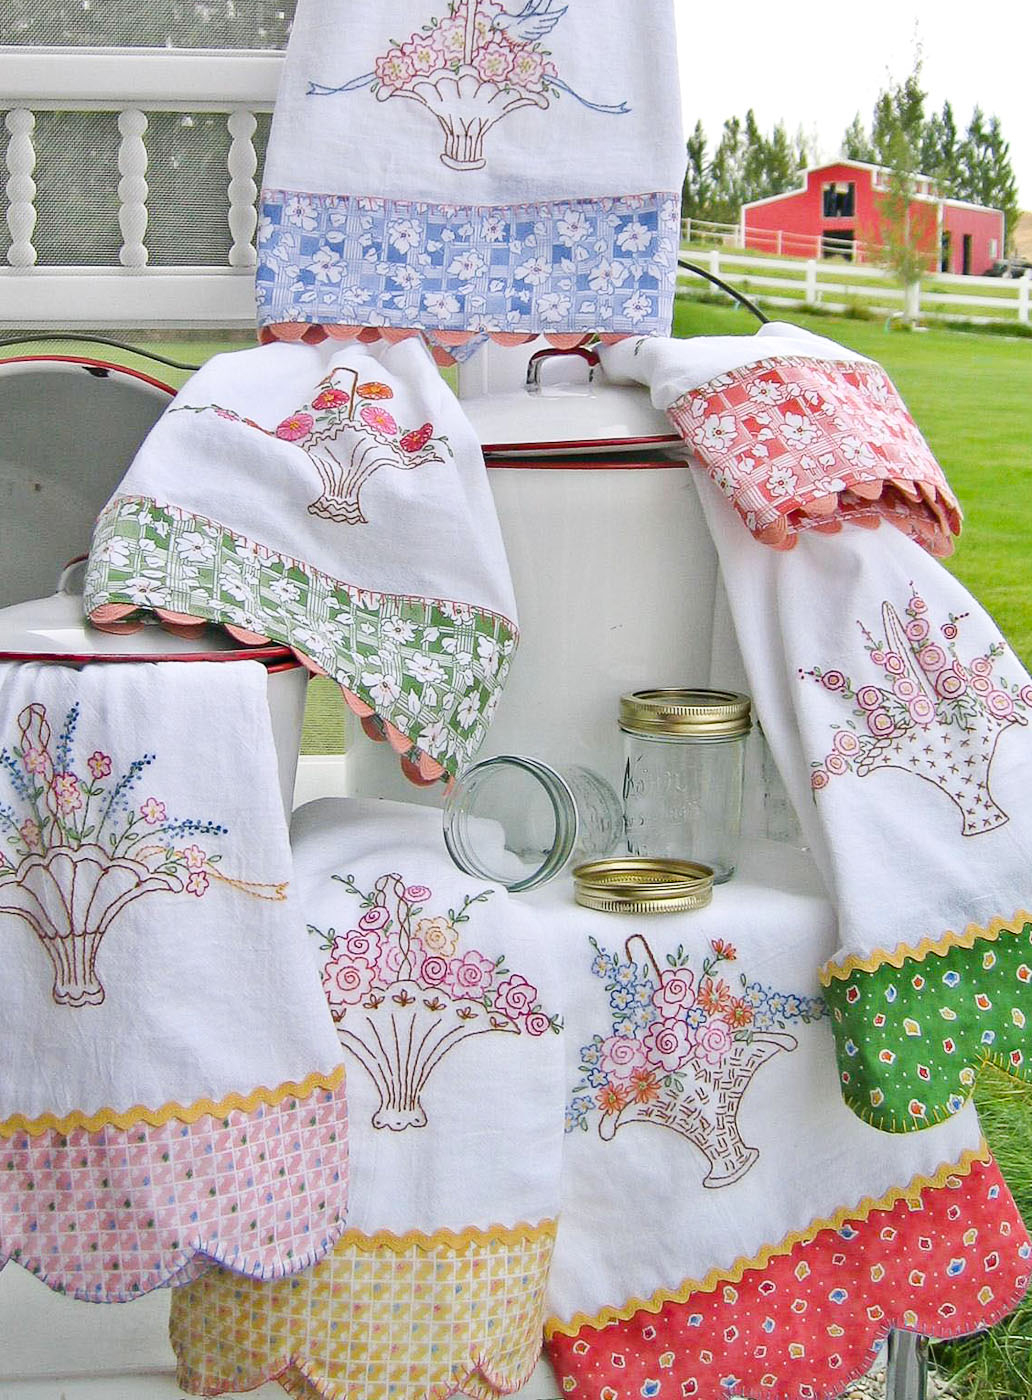 Kitchen Towel Embroidery Patterns craftainfo